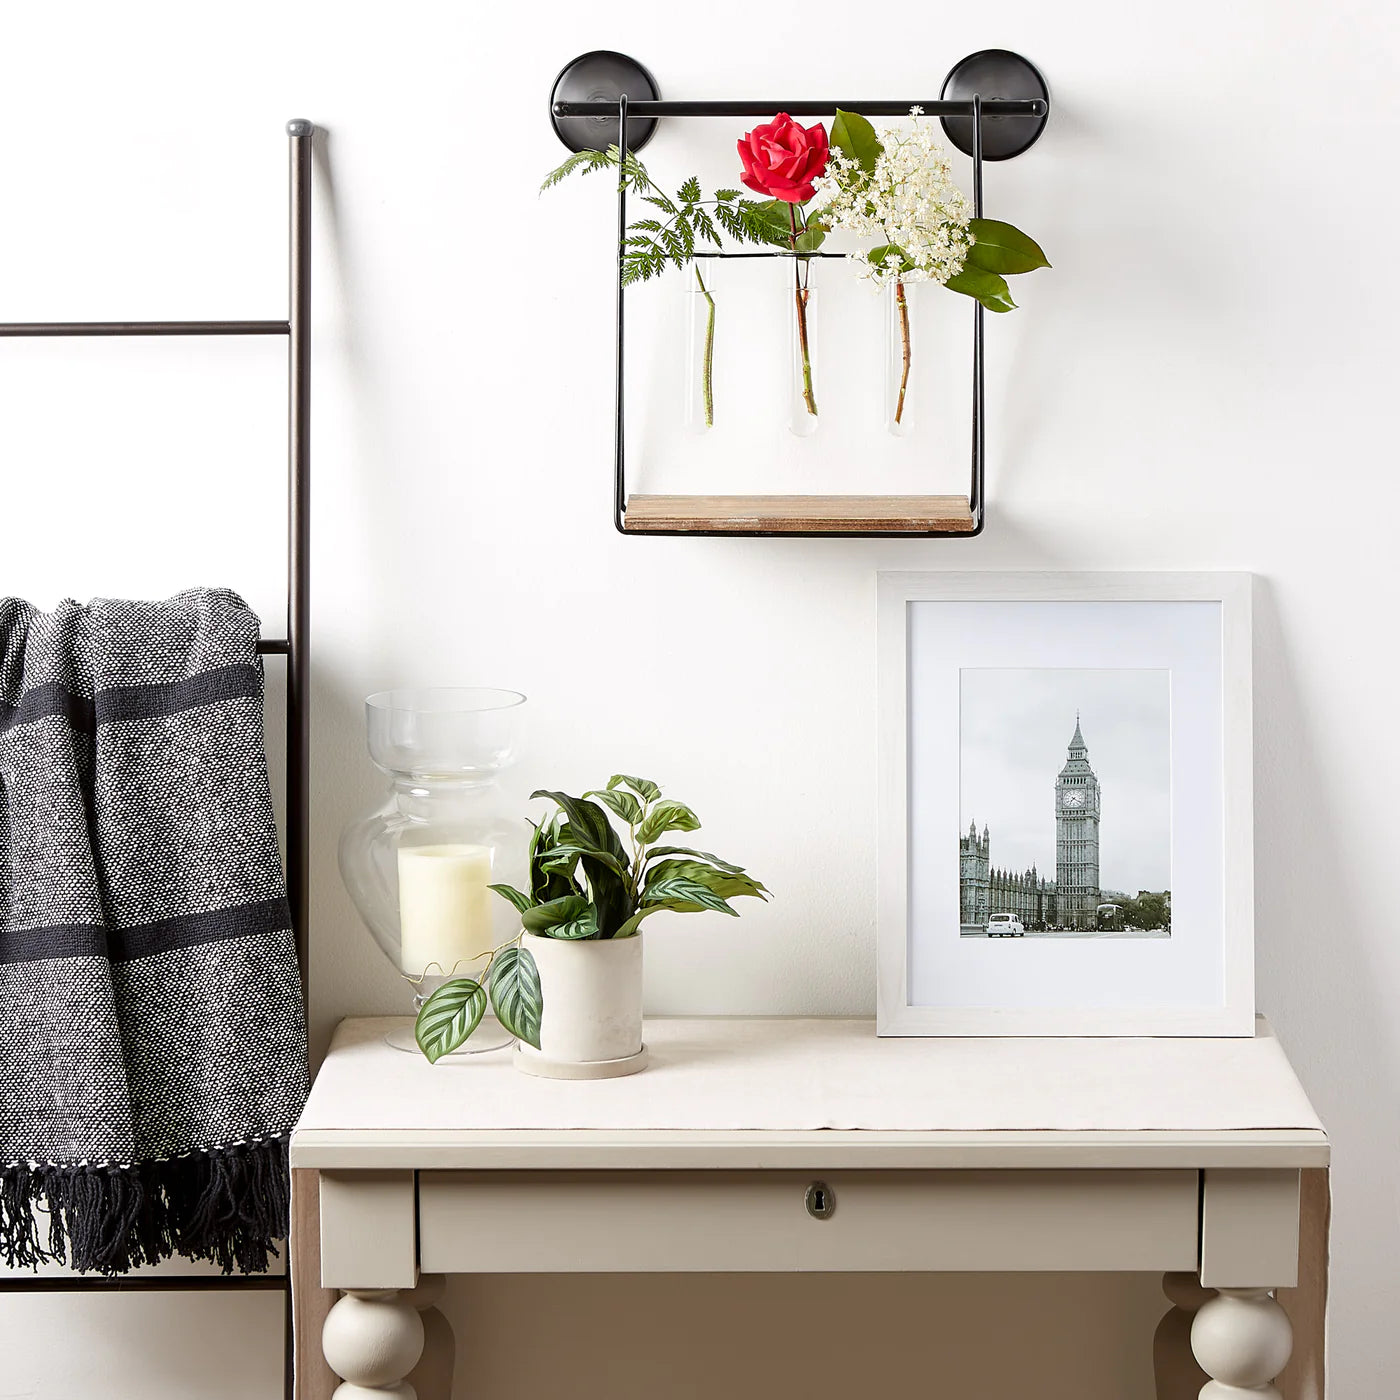 Wall Shelf With Vases